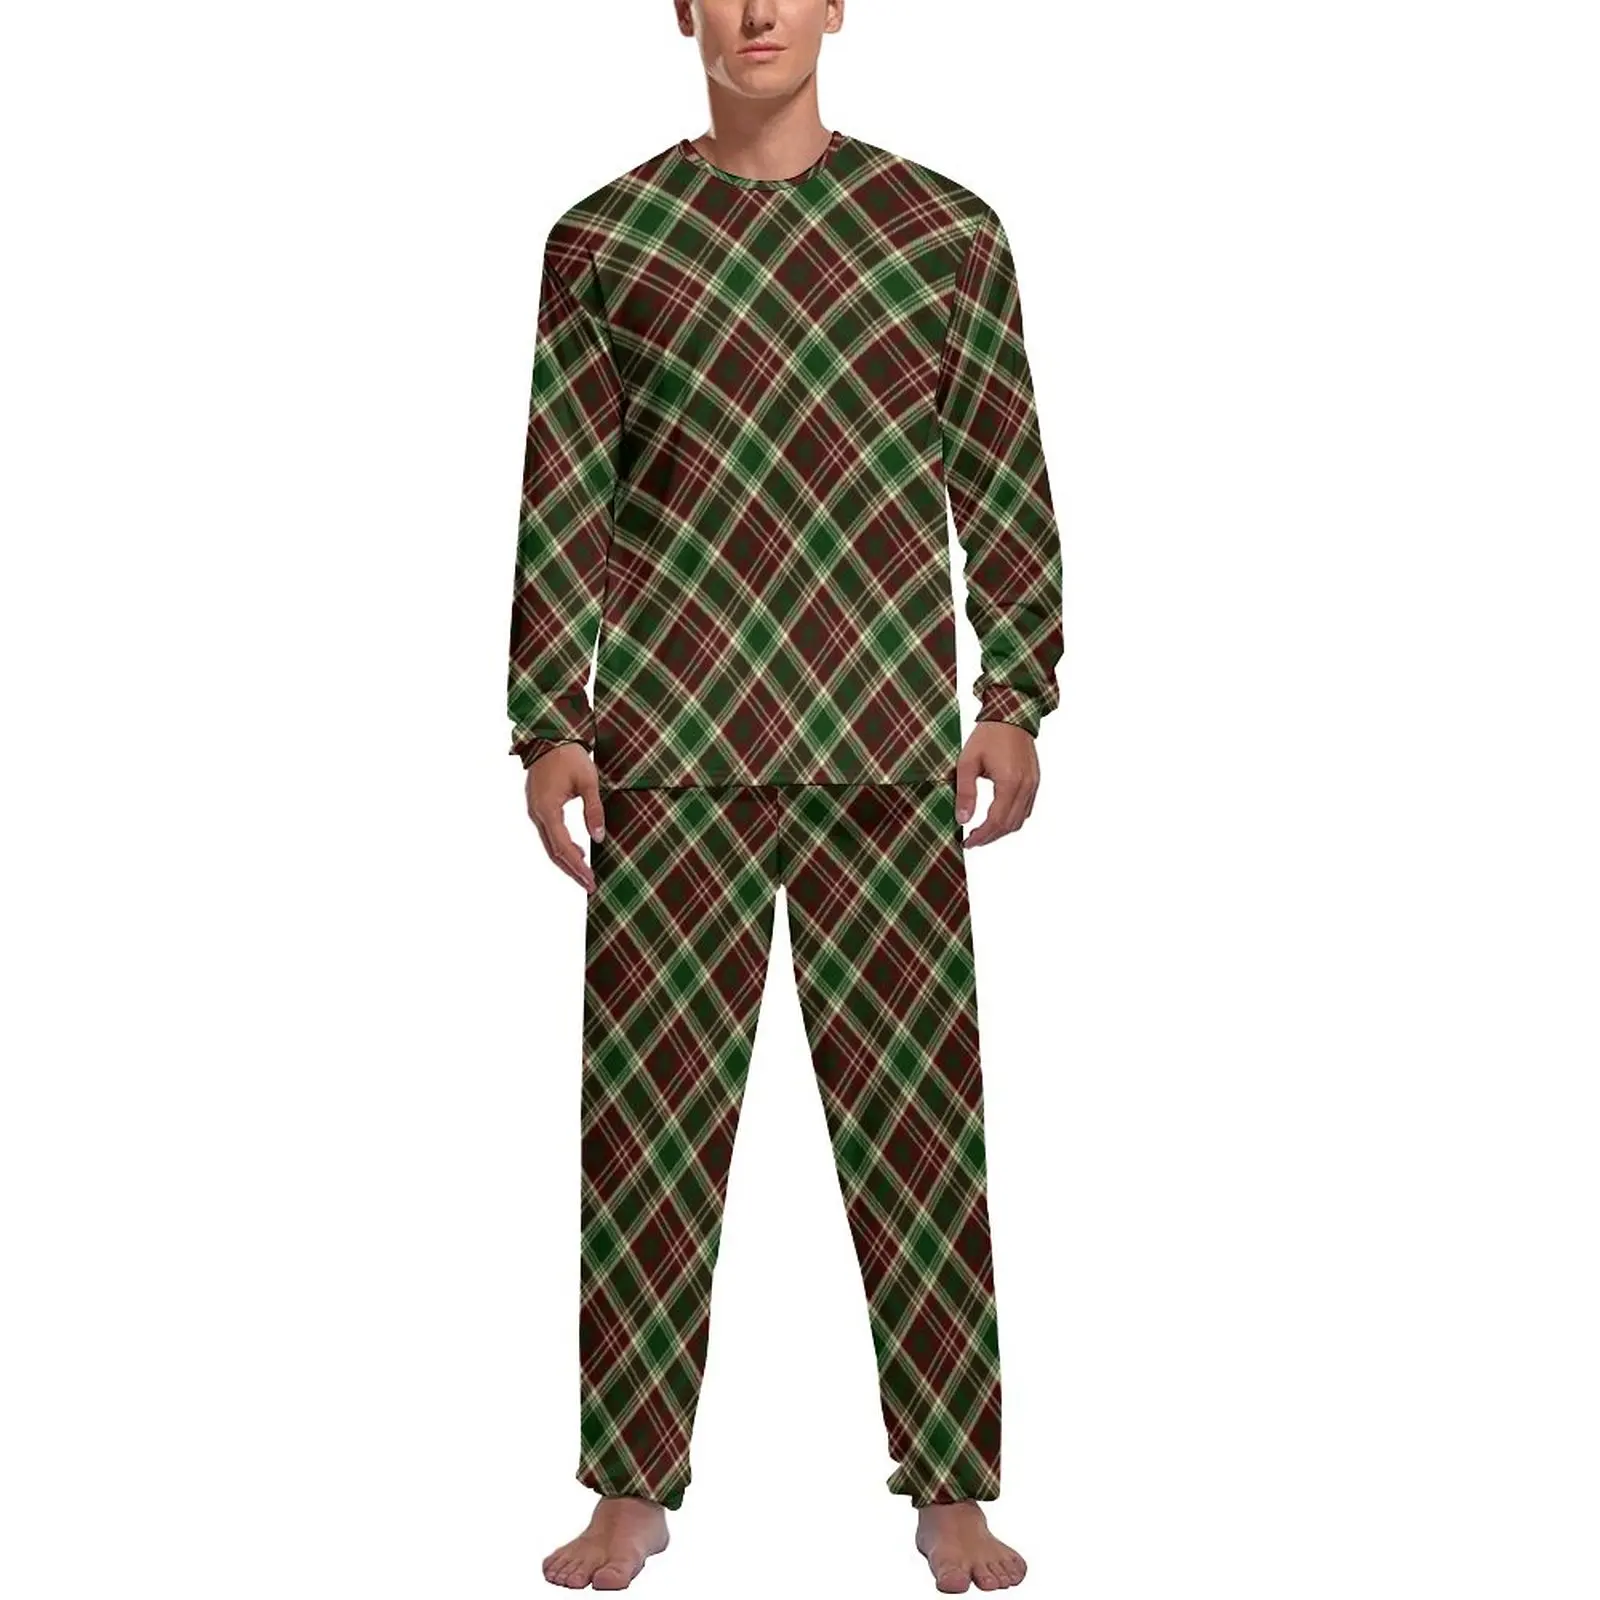 Madras Plaid Pajamas Red and Forest Green Male Long Sleeve Warm Pajama Sets 2 Pieces Leisure Daily Print Sleepwear Birthday Gift